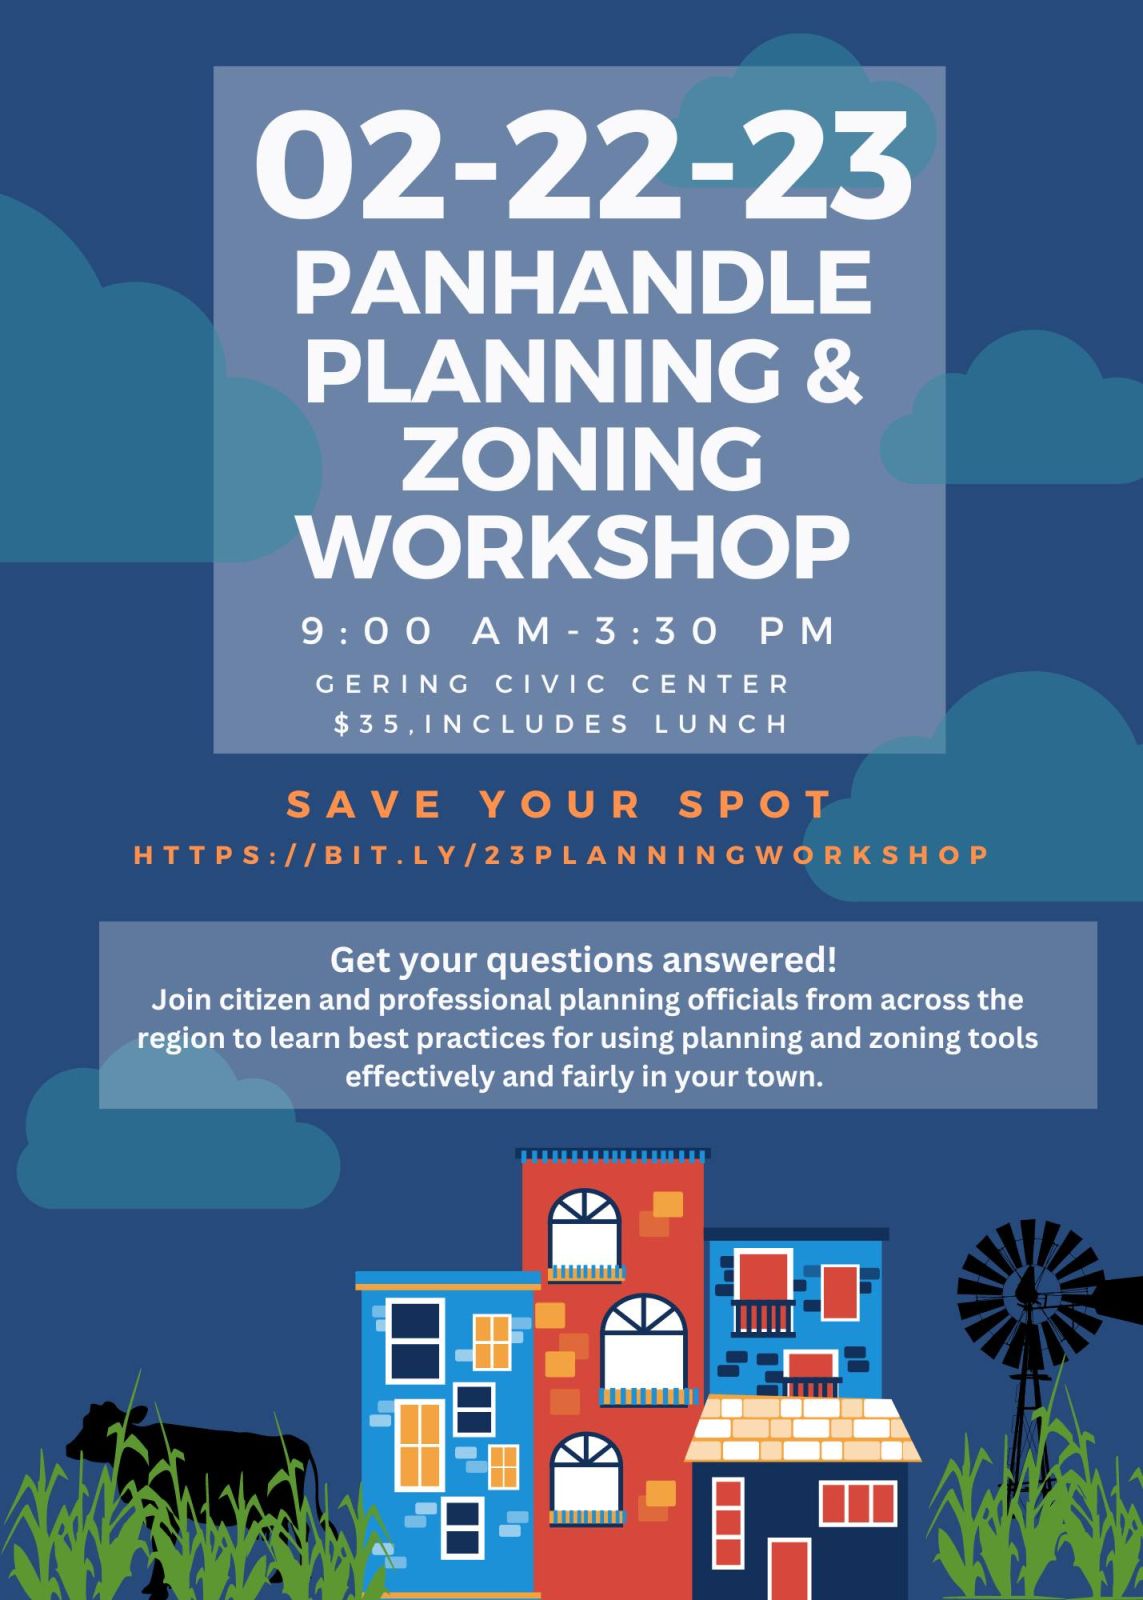 Event Promo Photo For 2023 Panhandle Planning Workshop